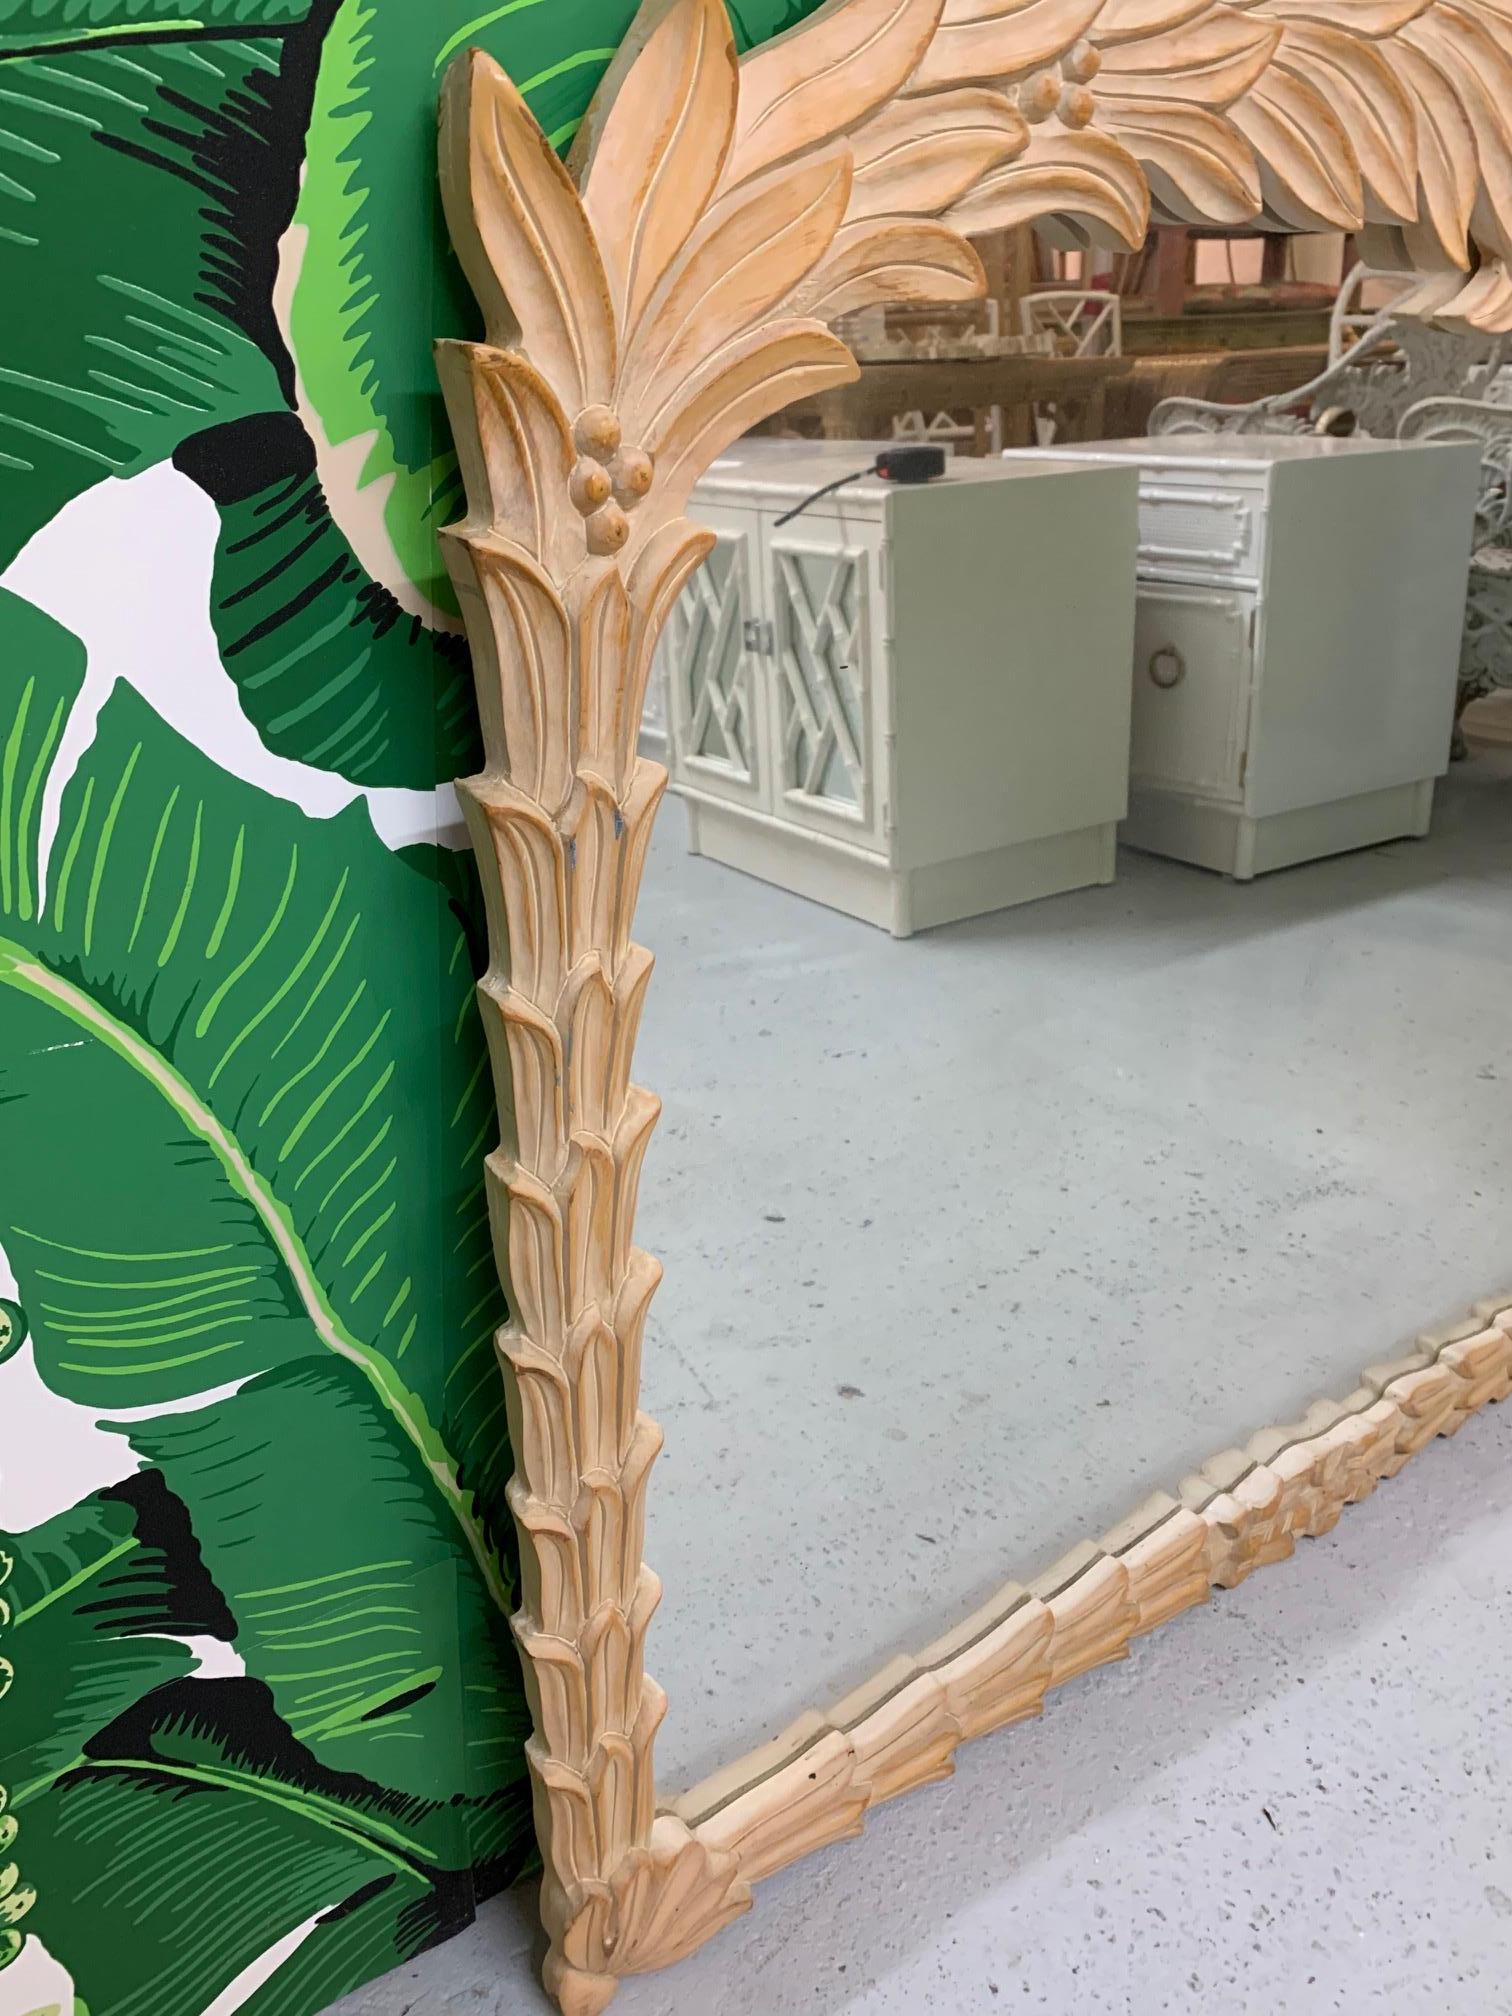 Large carved wood palm frond mirror in the manner of Serge Roche. Intricate carvings form an organic modern palm leaf pattern. Very good condition with only very minor imperfections consistent with age.